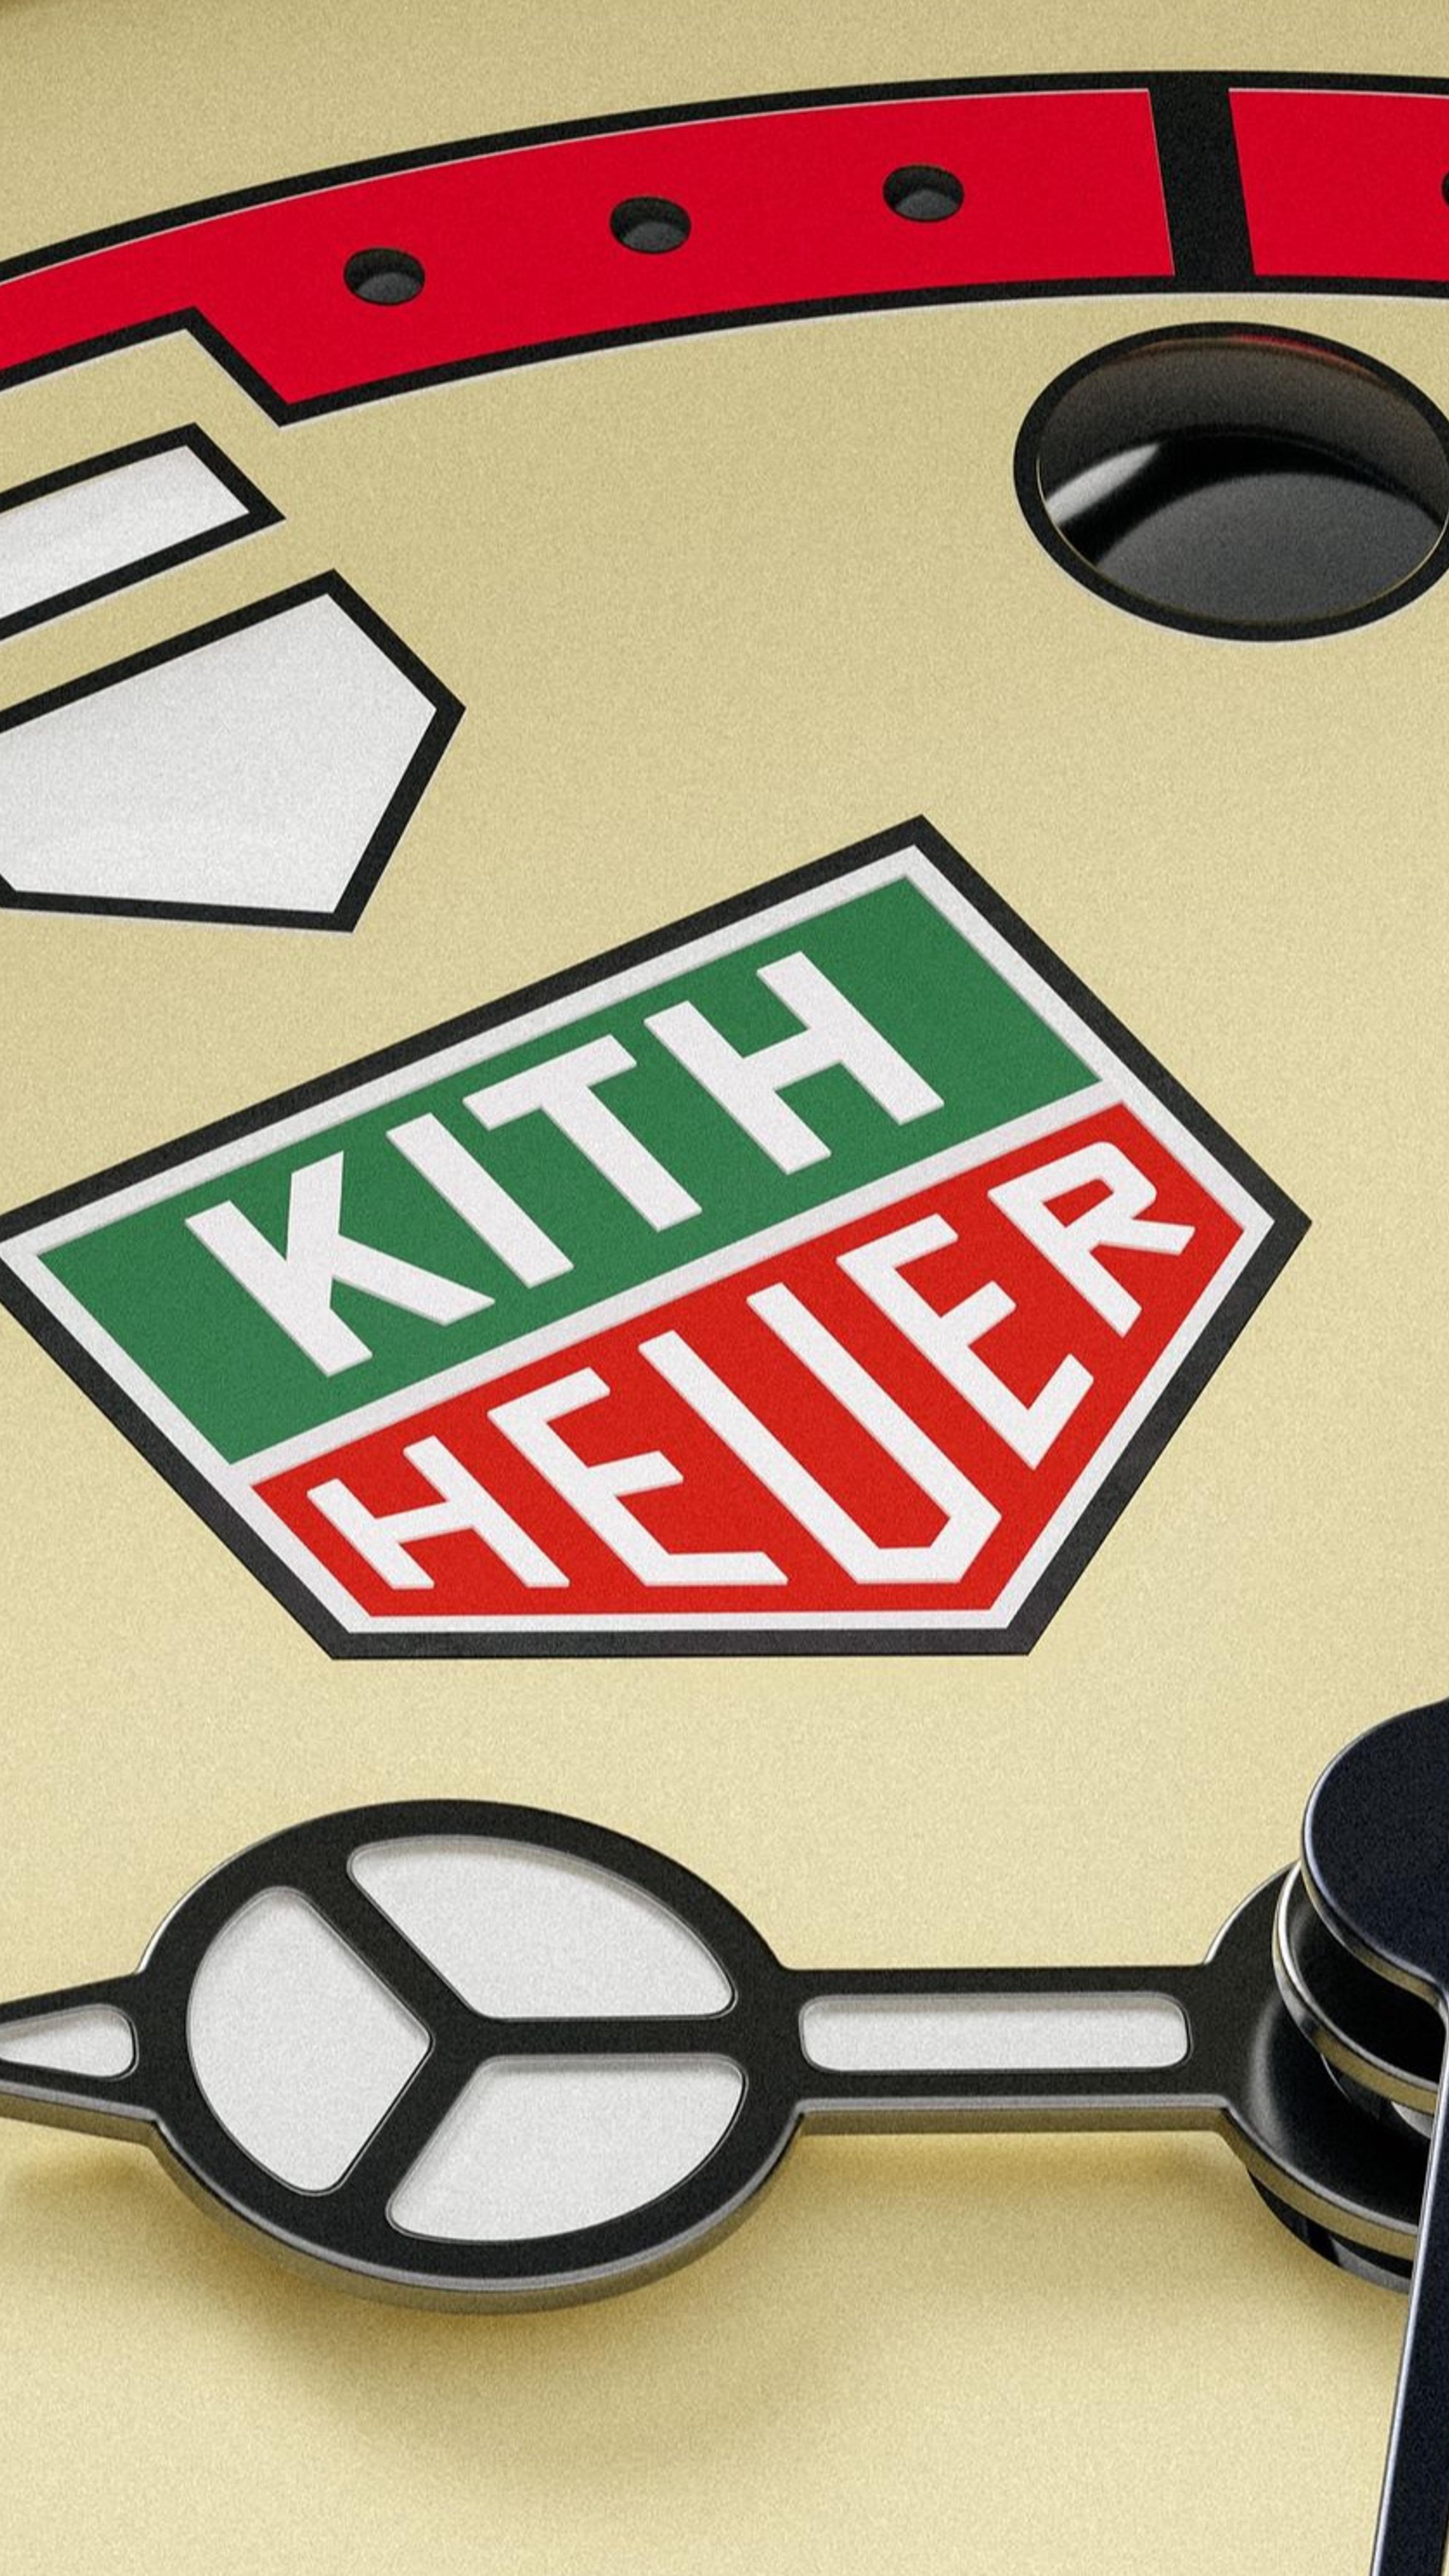 Preview image for the show titled "Tanner & Co: Presents Kith Tag Heuer" at Wednesday @ 11:00 PM